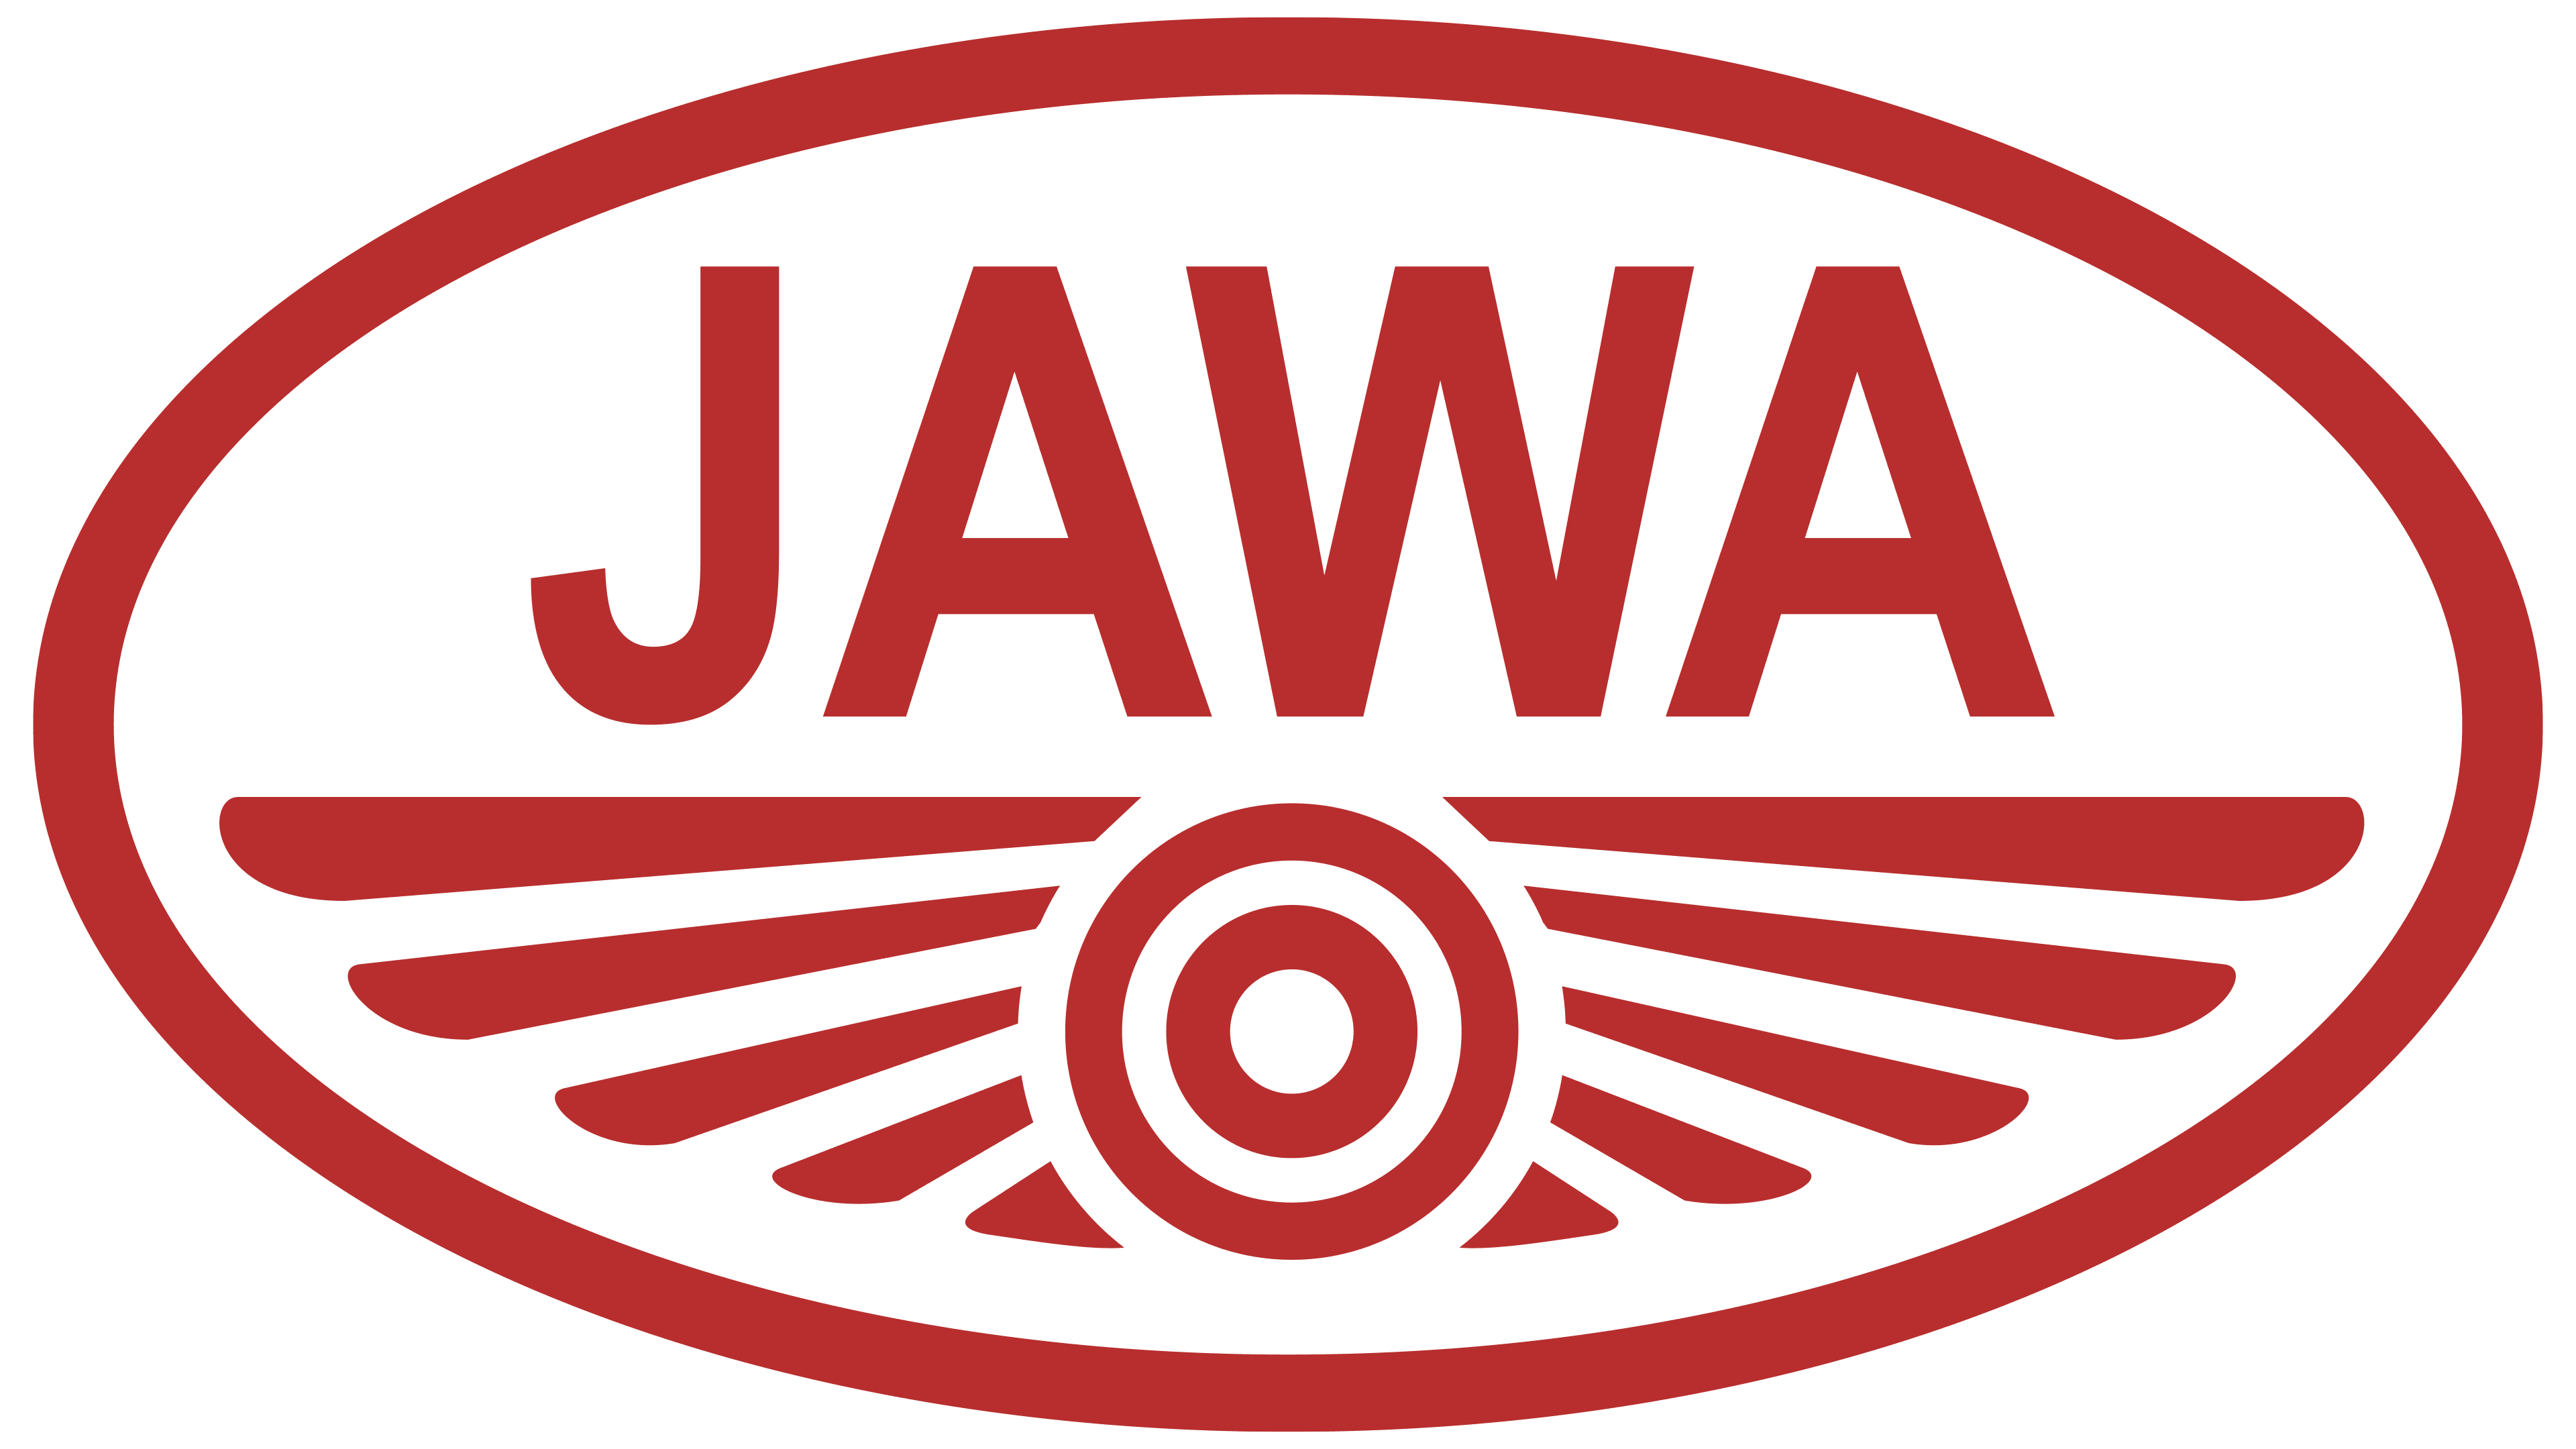 File:Coat of arms of Central Java.svg - Wikimedia Commons